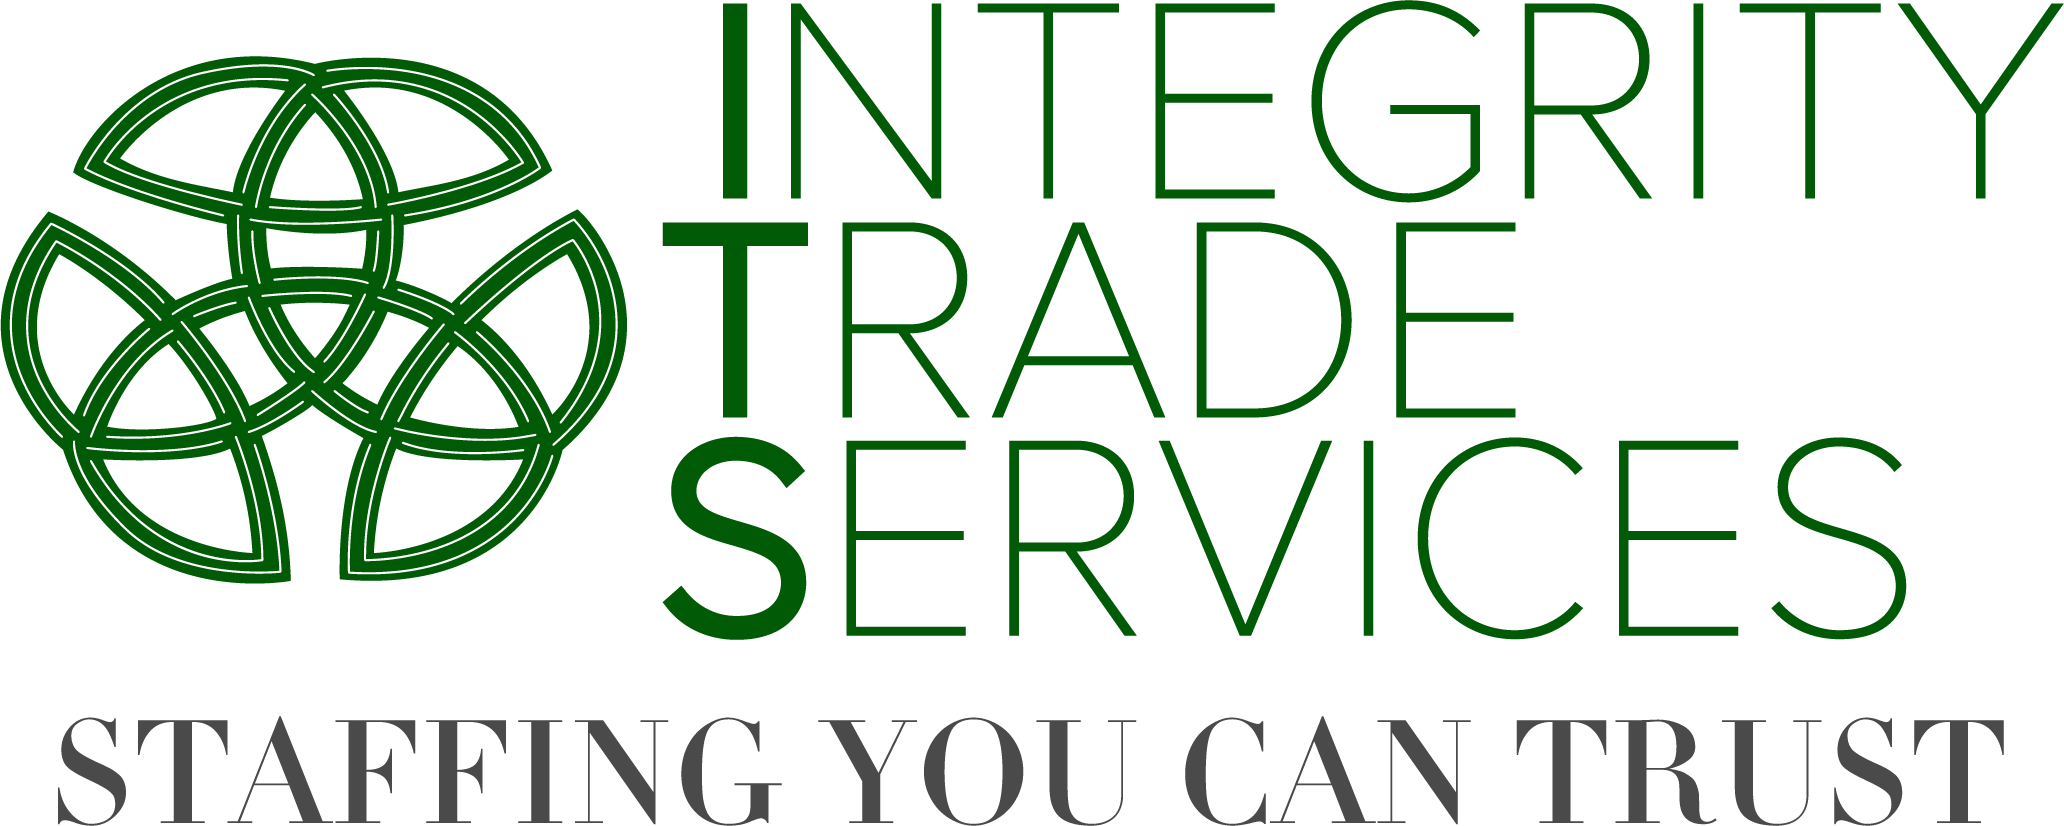 Avionte client for staffing software Integrity Trade Services logo